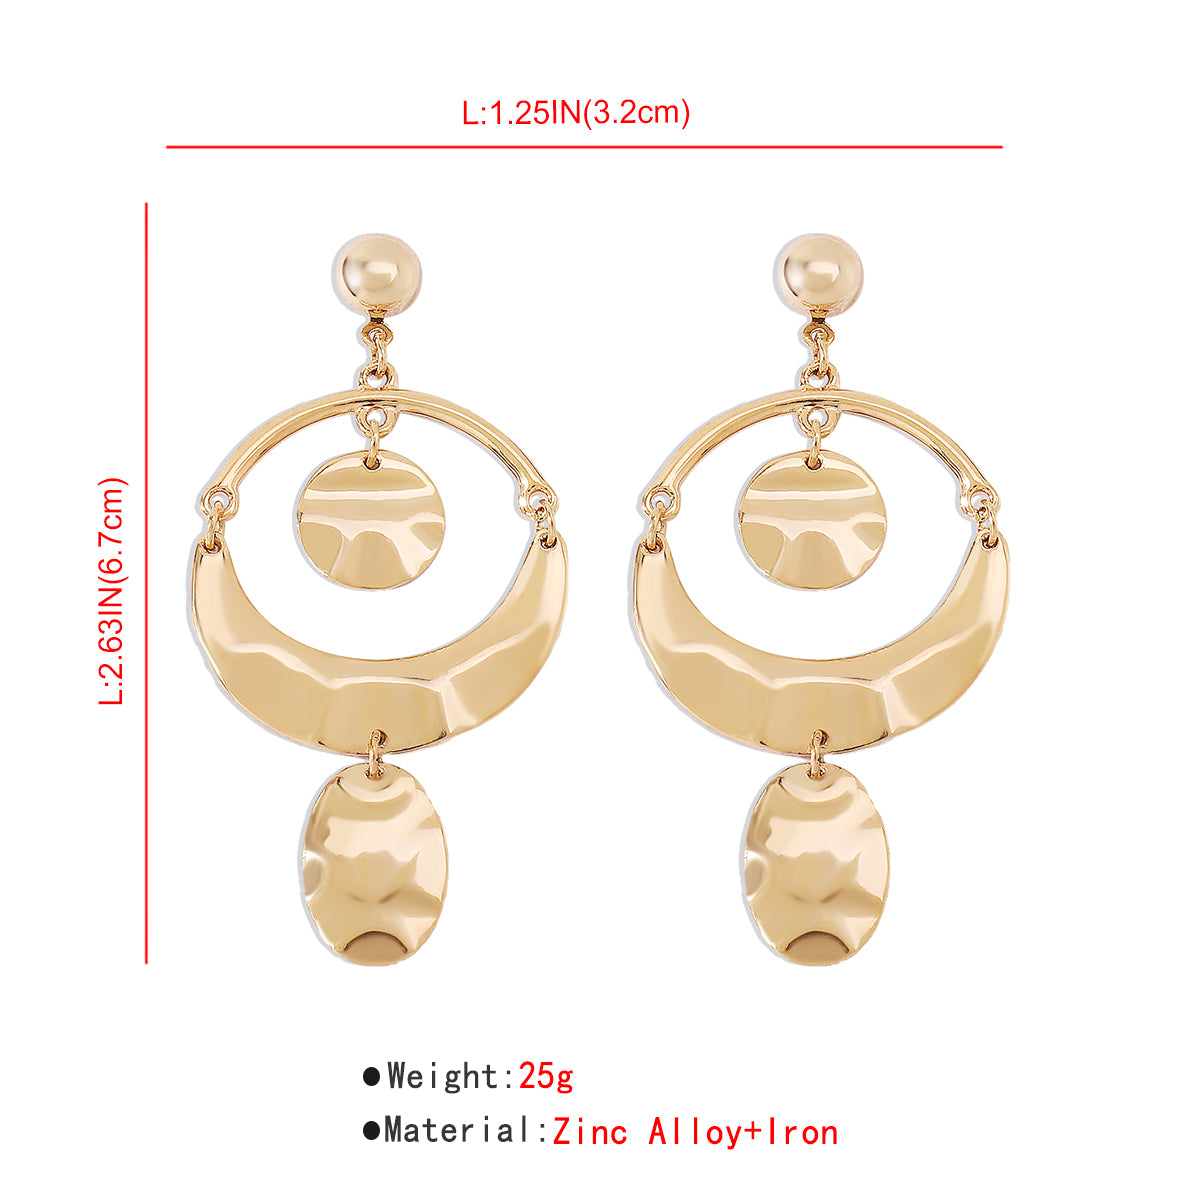 Shinny Gold Plated Hammered Round Pendant Earrings medyjewelry